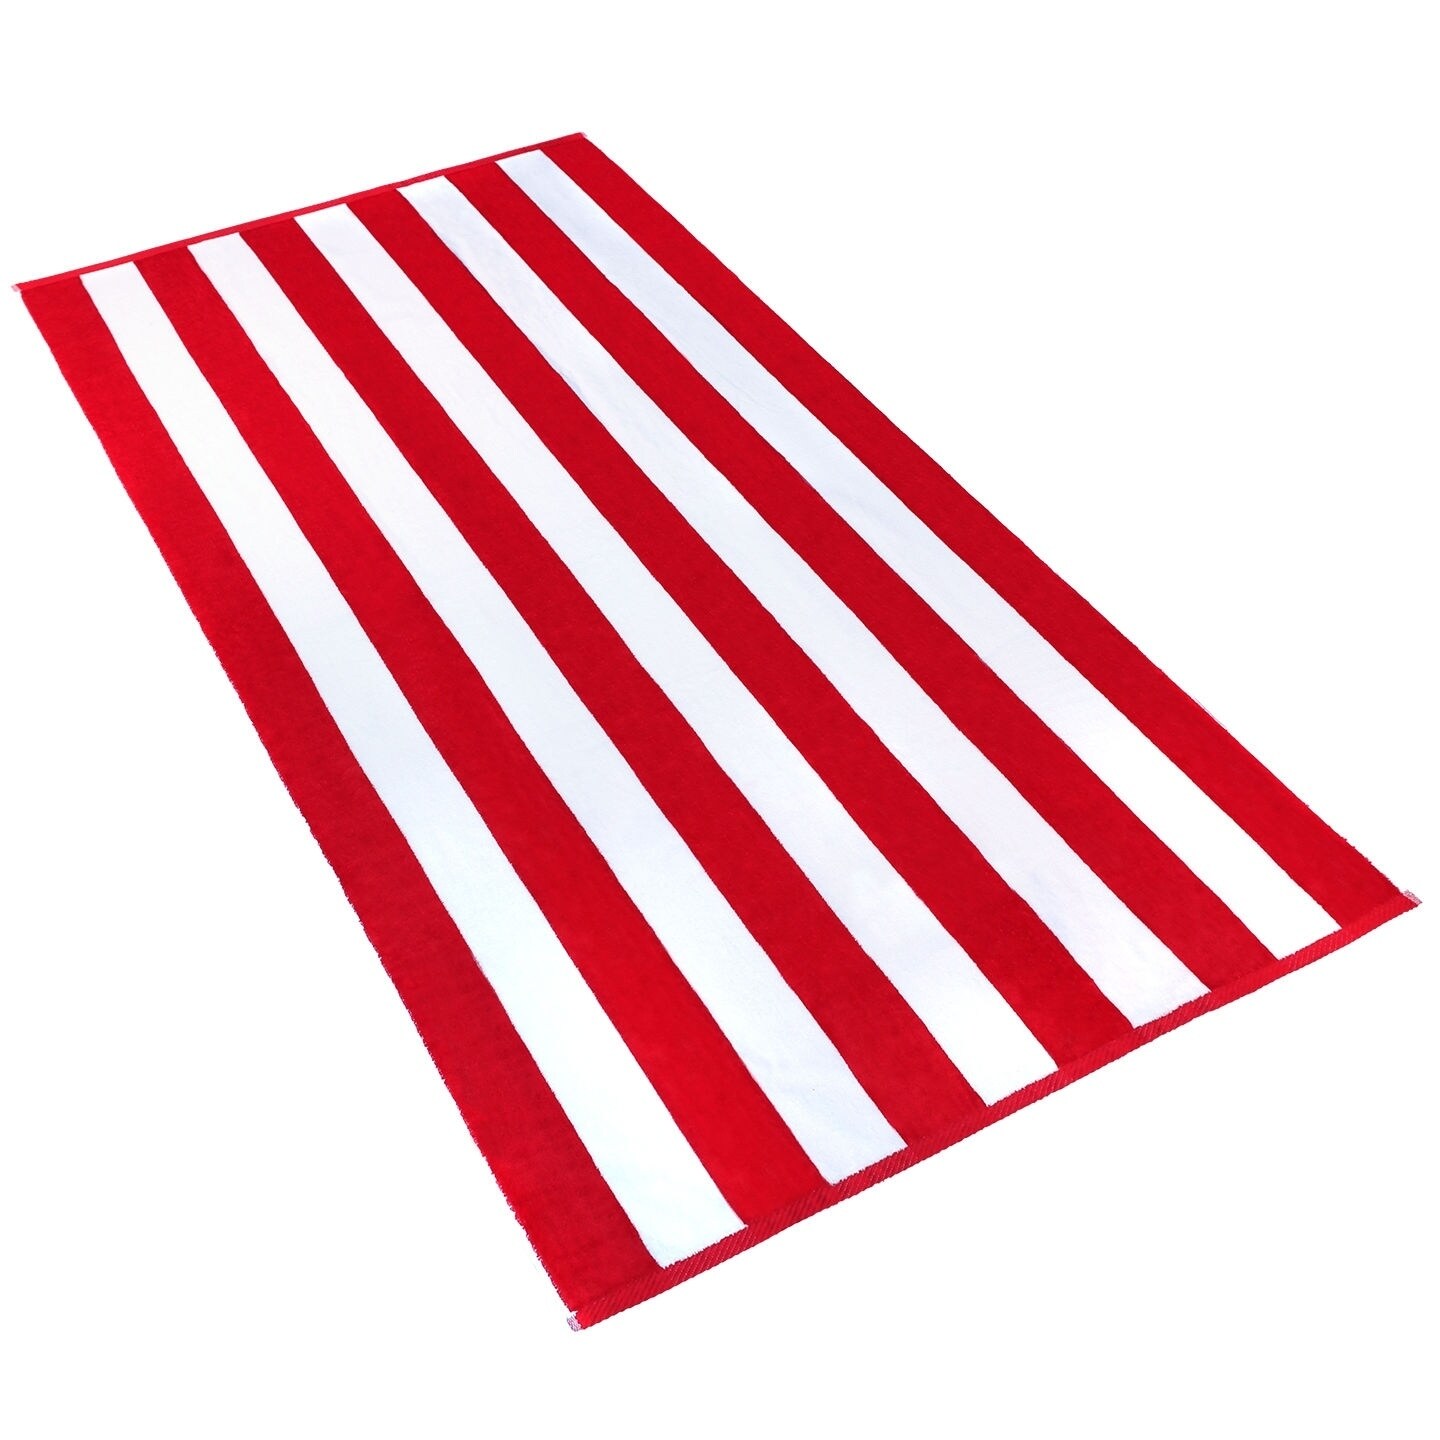 https://ak1.ostkcdn.com/images/products/25715815/KAUFMAN-4PC-Pack-32X62-Velour-Cabana-Stripe-Beach-Towels-RED-WHITE-N-A-e9a2bf6f-77a4-43c8-b488-8b2490edb9ac.jpg